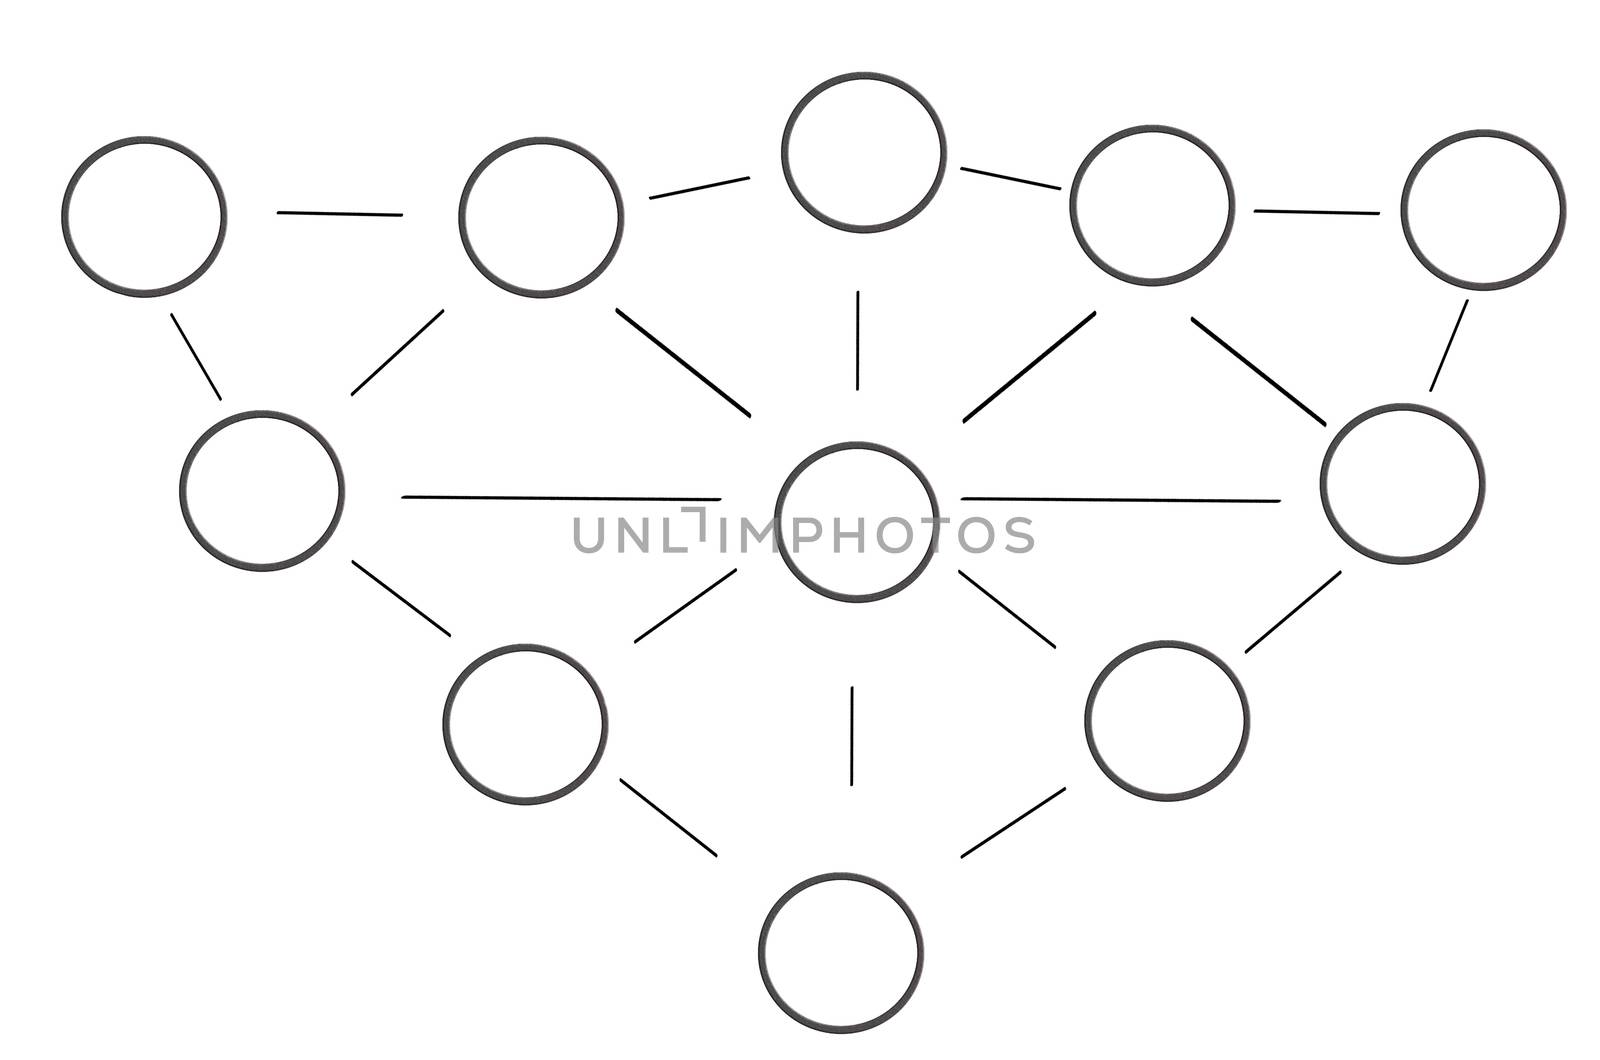 Various circle with lines Connected. Symbolizes network.